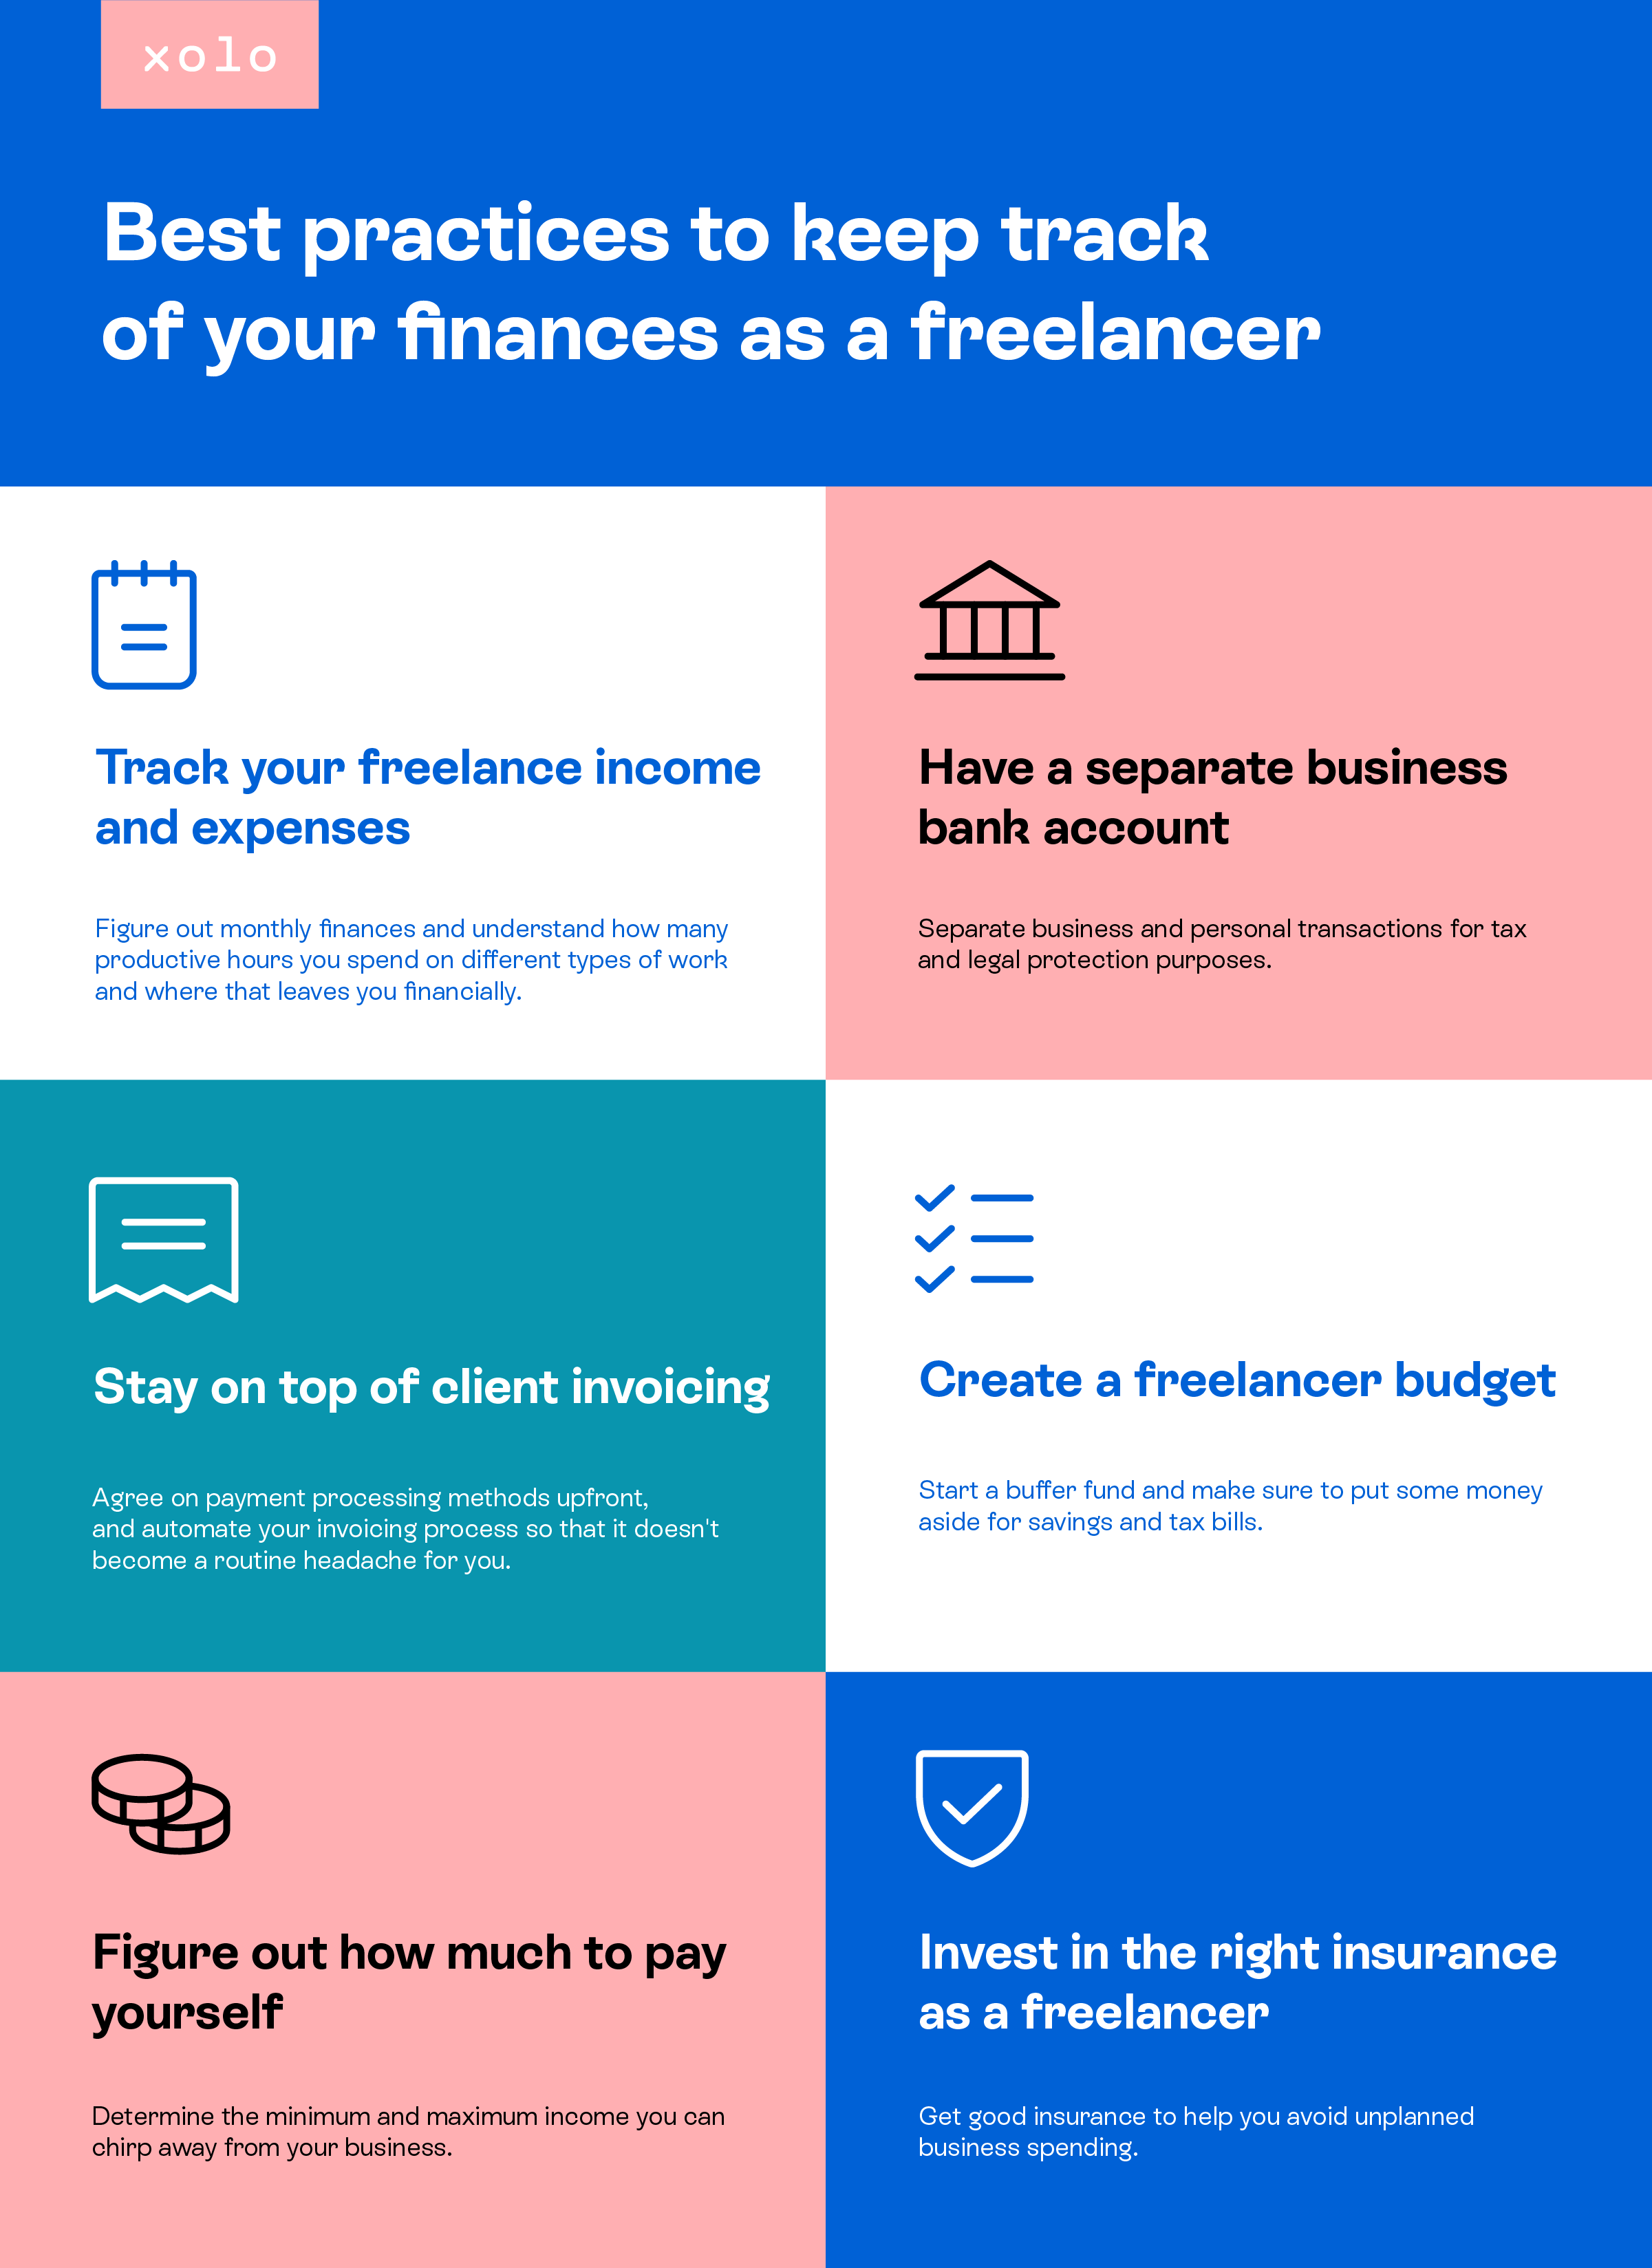 Best practices to keep track of your finances as a freelancer